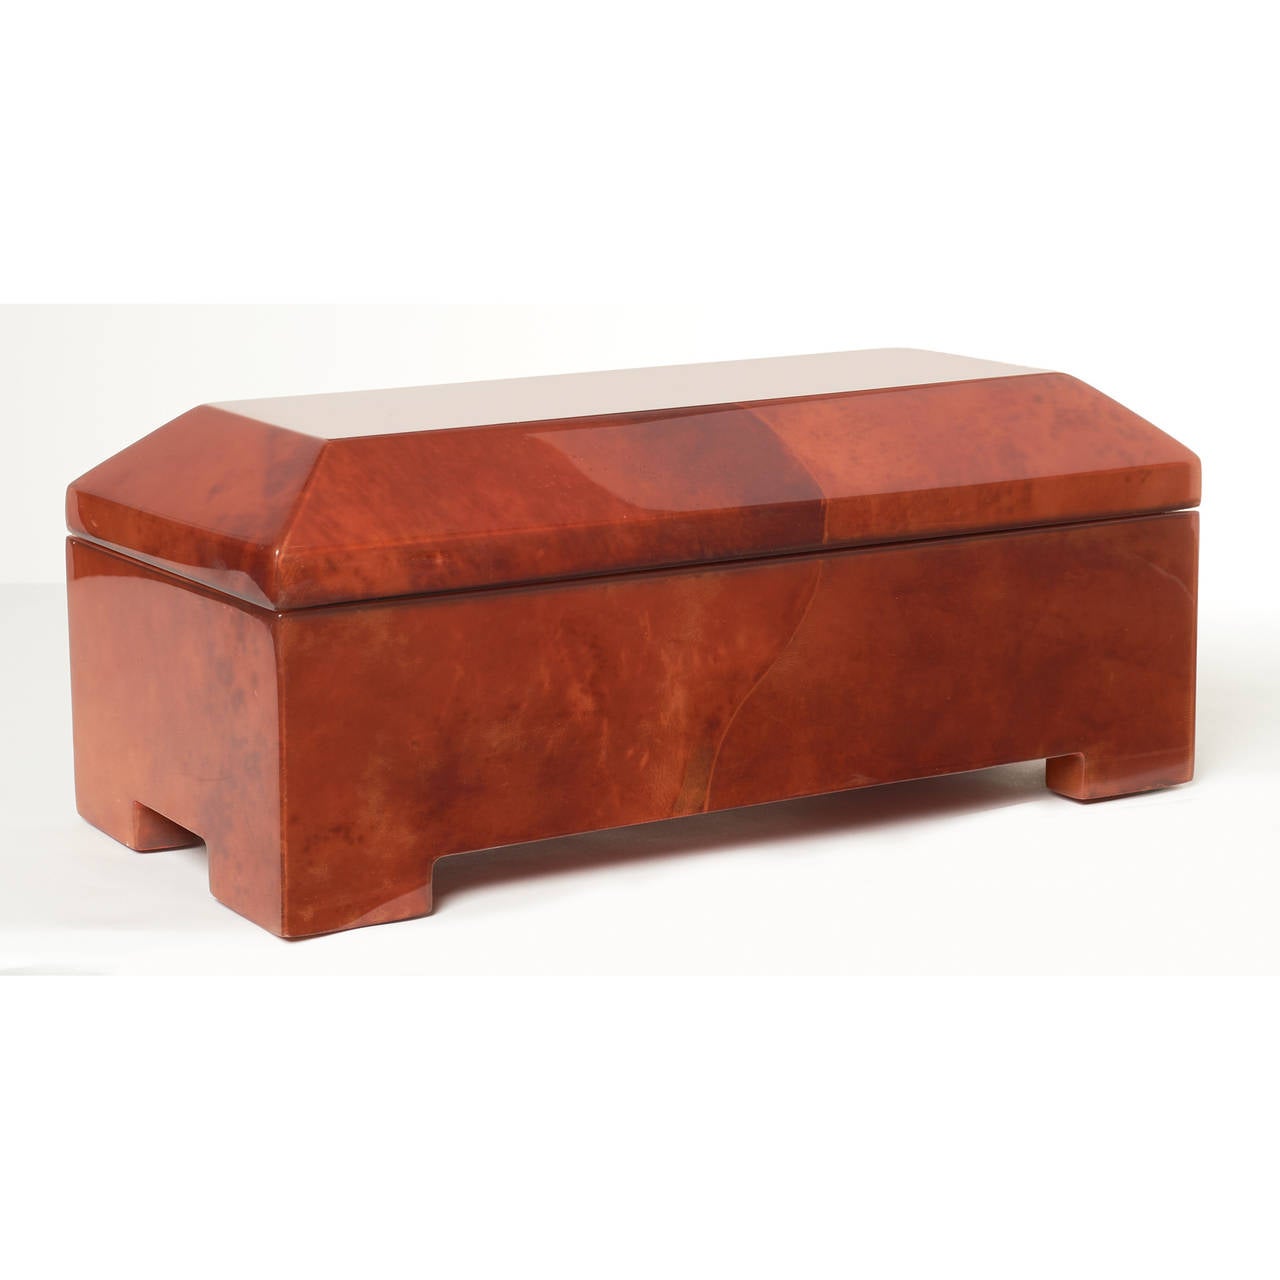 Casket form jewelry box wrapped in blood red dyed parchment. Hinged top opens to reveal felt lined interior. By Maitland-Smith. Philippines, circa 1980.
NYDC